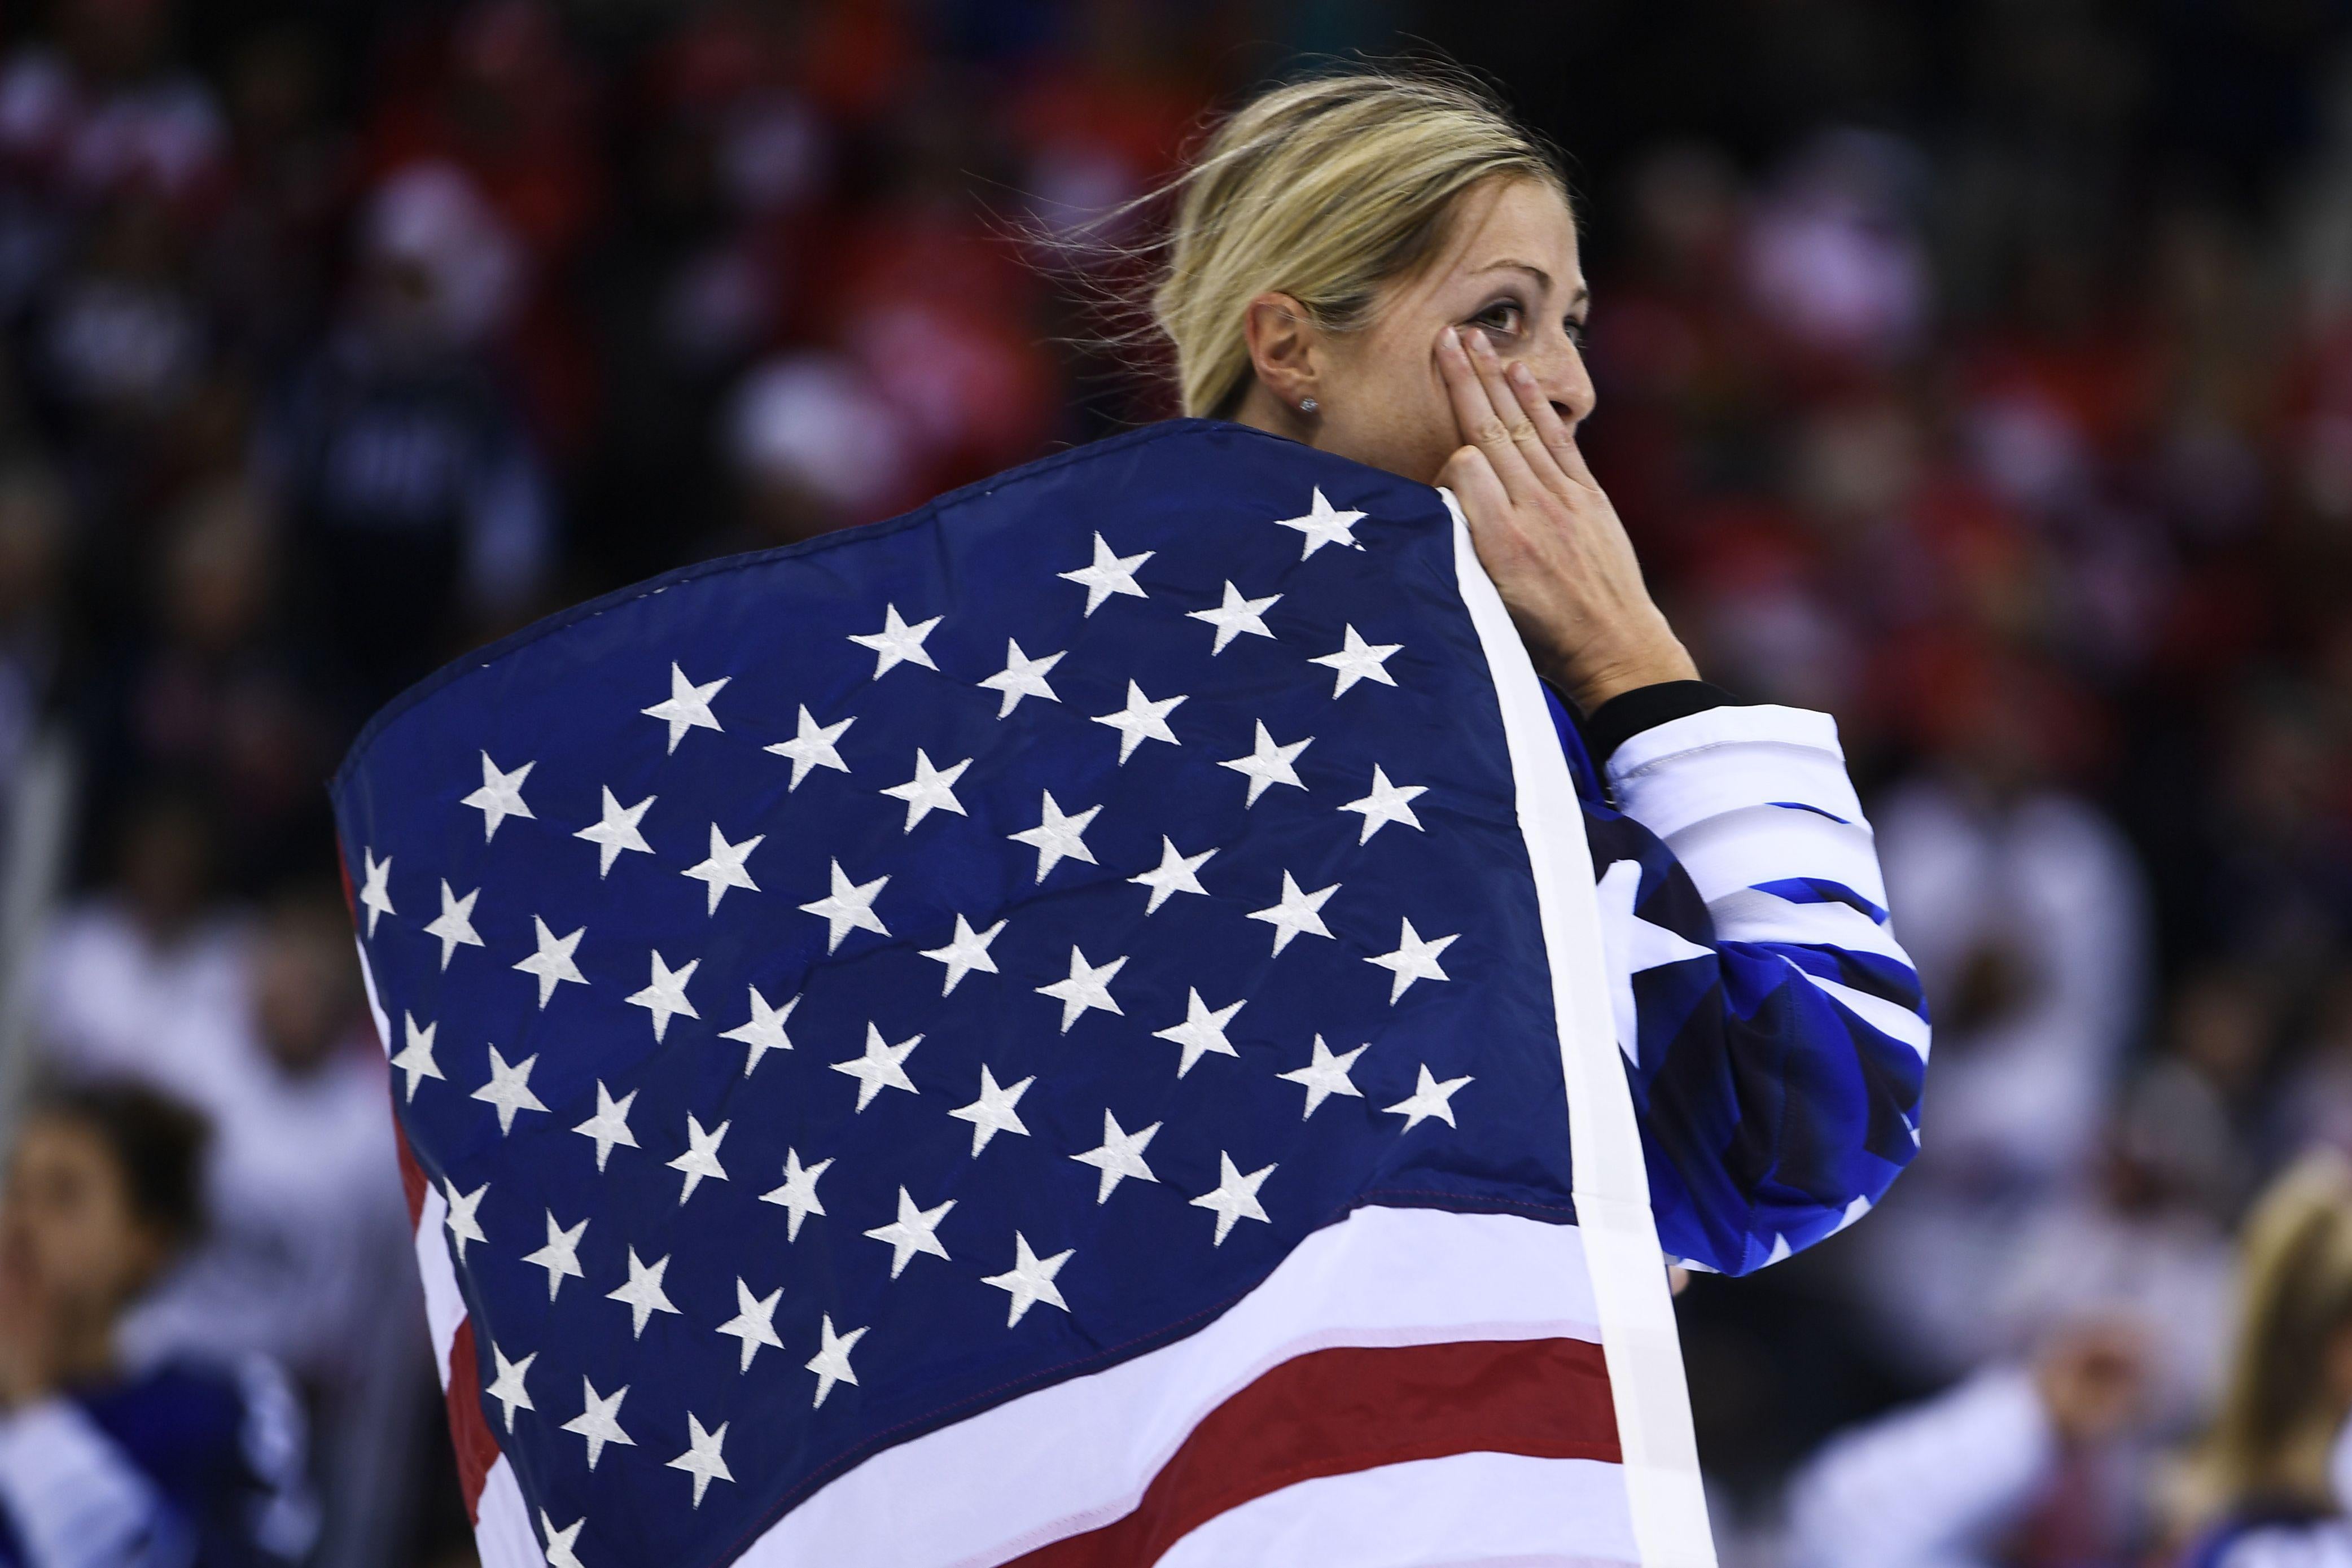 USA's Gigi Marvin holds the US flag after her team won the women's gold medal ice hockey match between the US and Canada during the Pyeongchang 2018 Winter Olympic Games at the Gangneung Hockey Centre in Gangneung on February 22, 2018.   / AFP PHOTO / Brendan Smialowski        (Photo credit should read BRENDAN SMIALOWSKI/AFP/Getty Images)